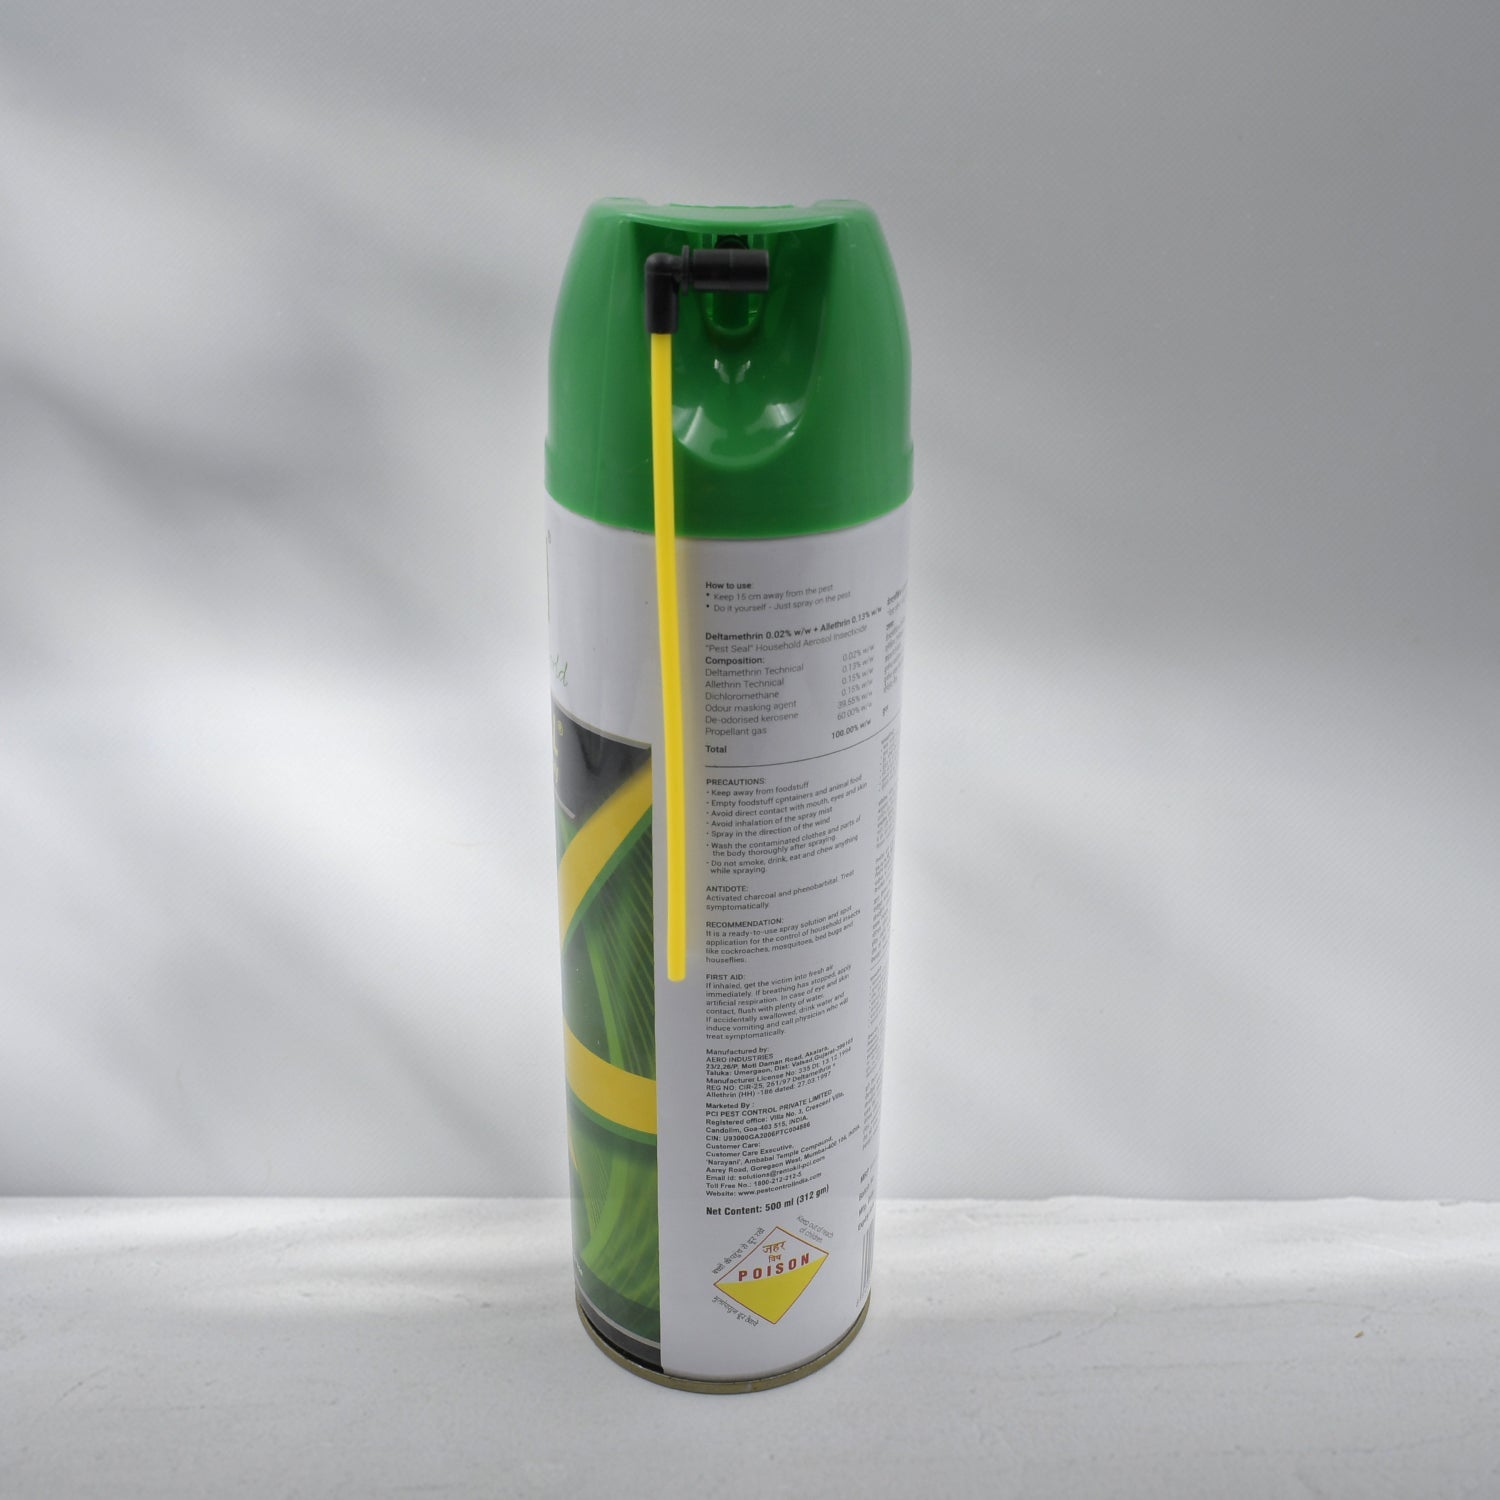 0270A Pci Pest Seal Multi Pest Spray 500 ML, For Personal,  PCI Aerosol Spray for All Flying and crawling insects such as flies, mosquitoes, cockroaches, etc (500 ML)